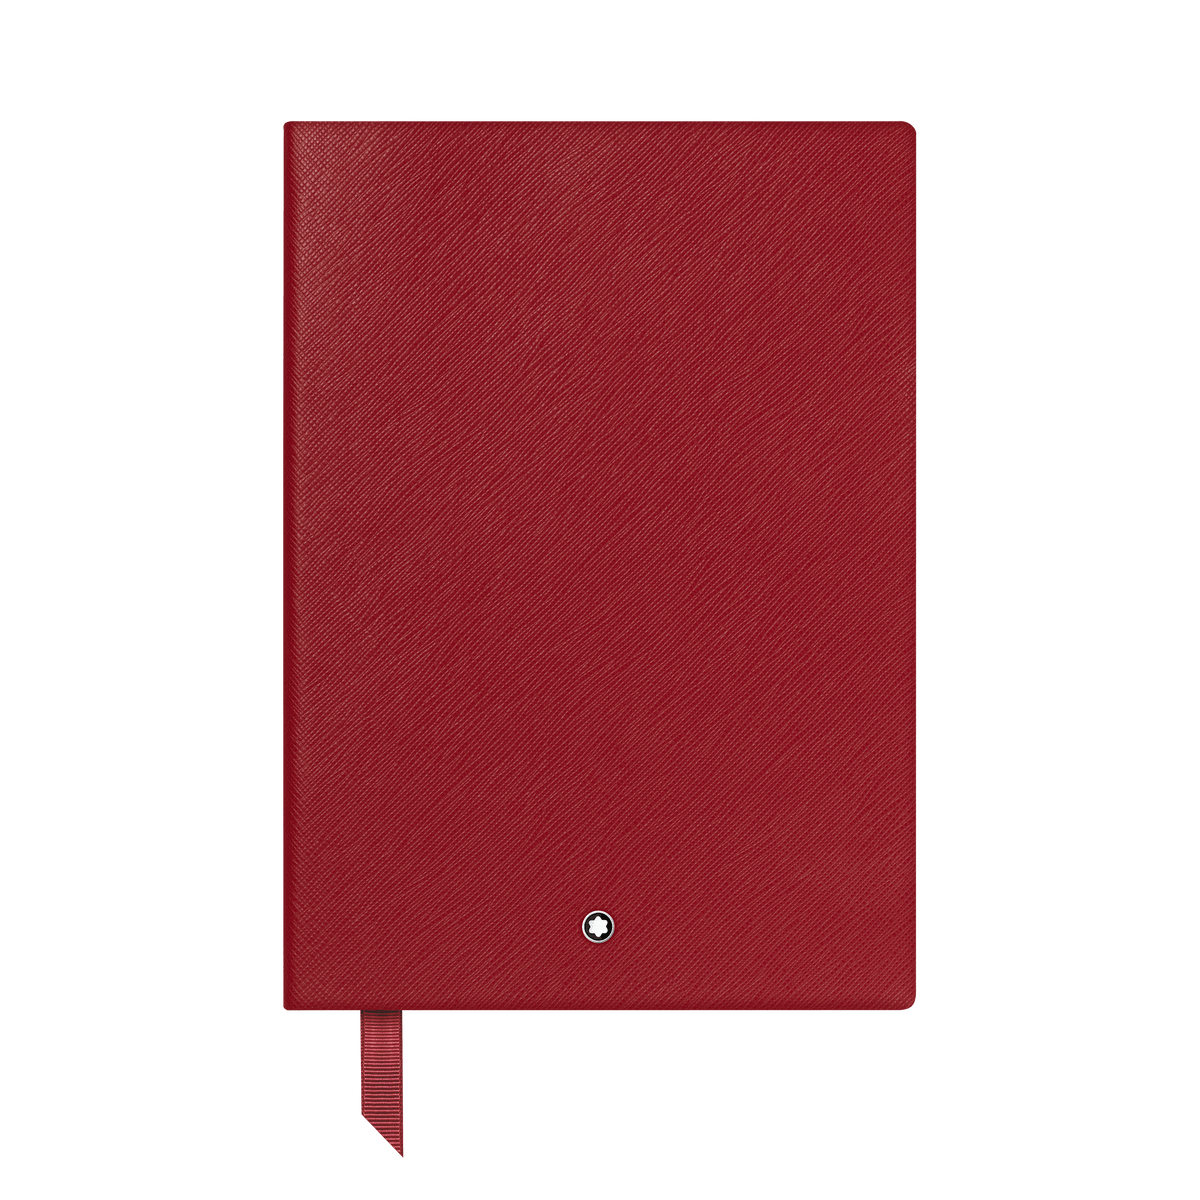 Montblanc Fine Stationery Notebook #146 Red, Lined